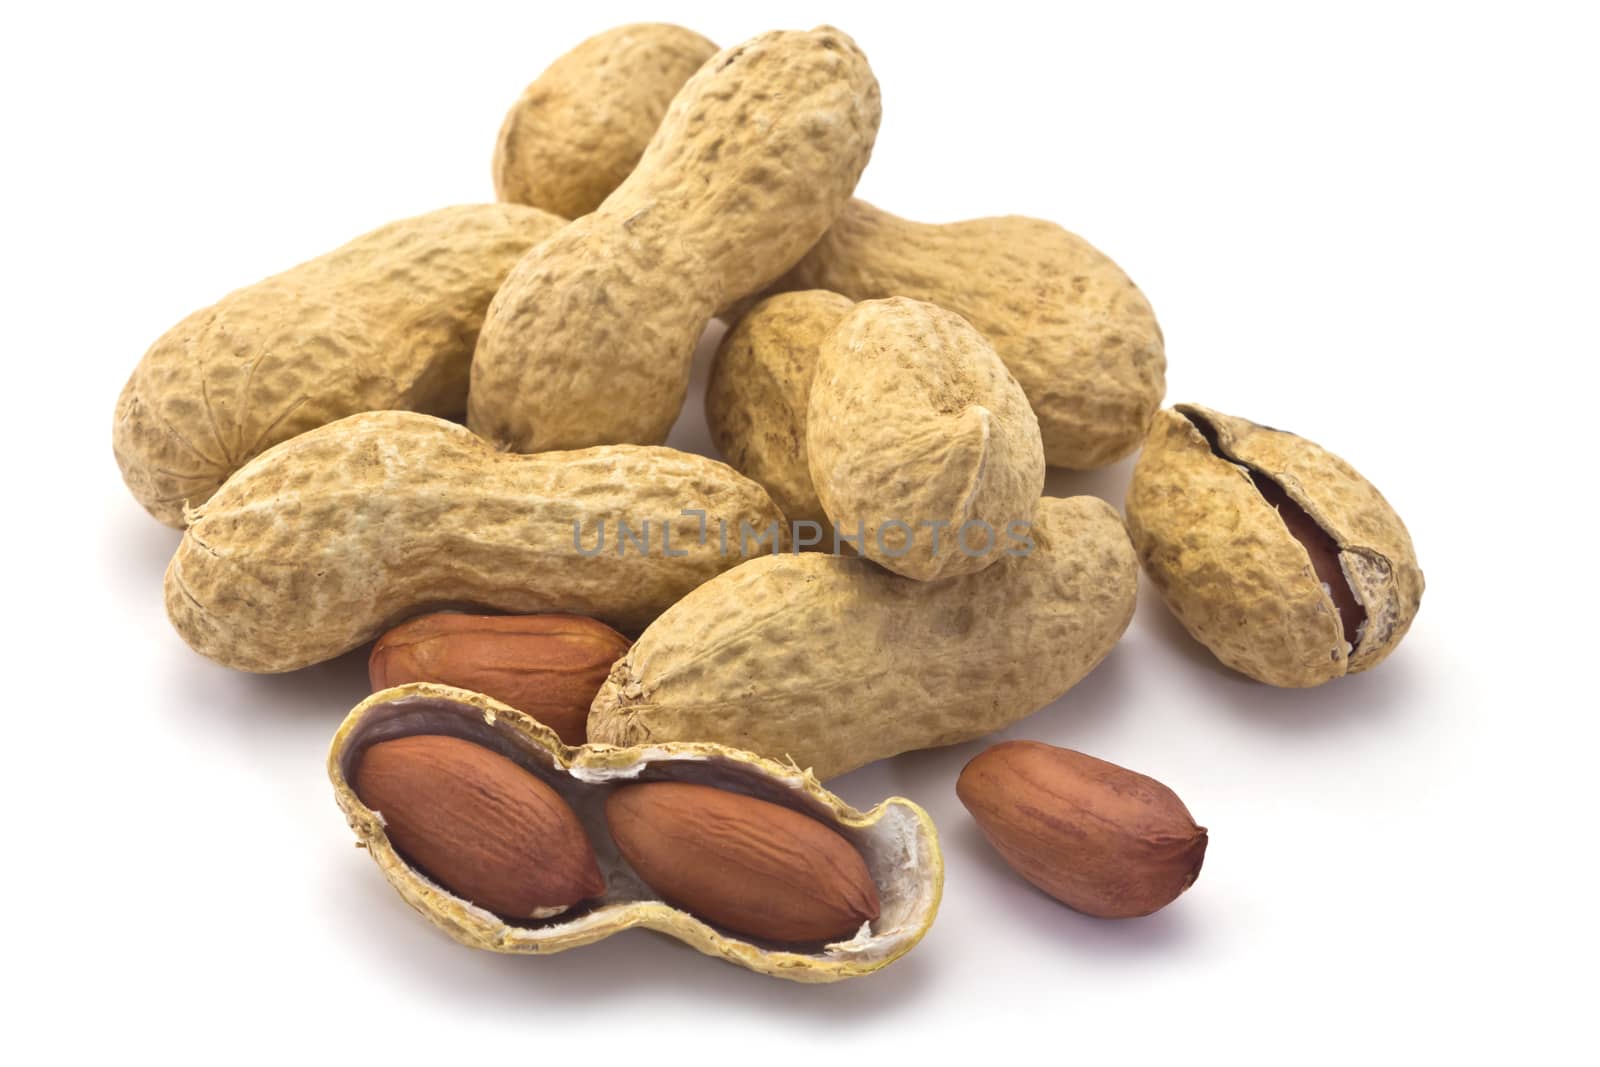 peanuts in the shell on a white background